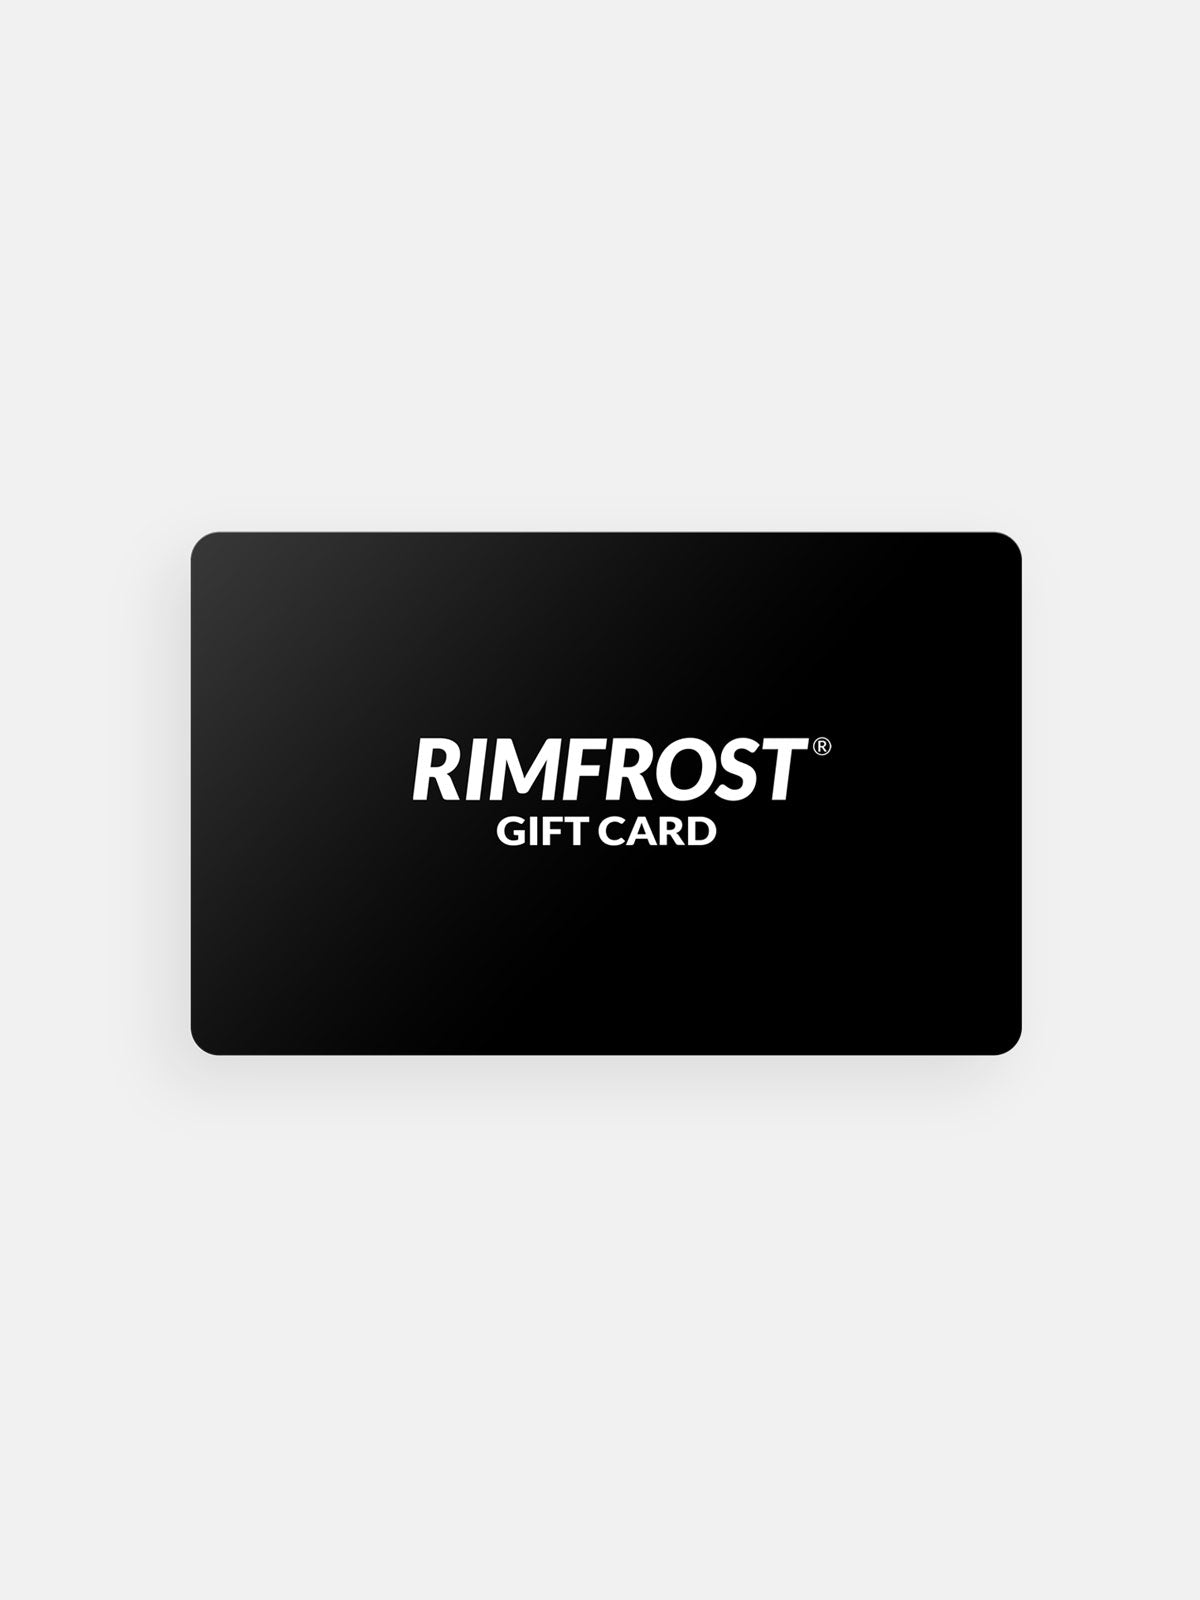 Gift Card - RIMFROST®